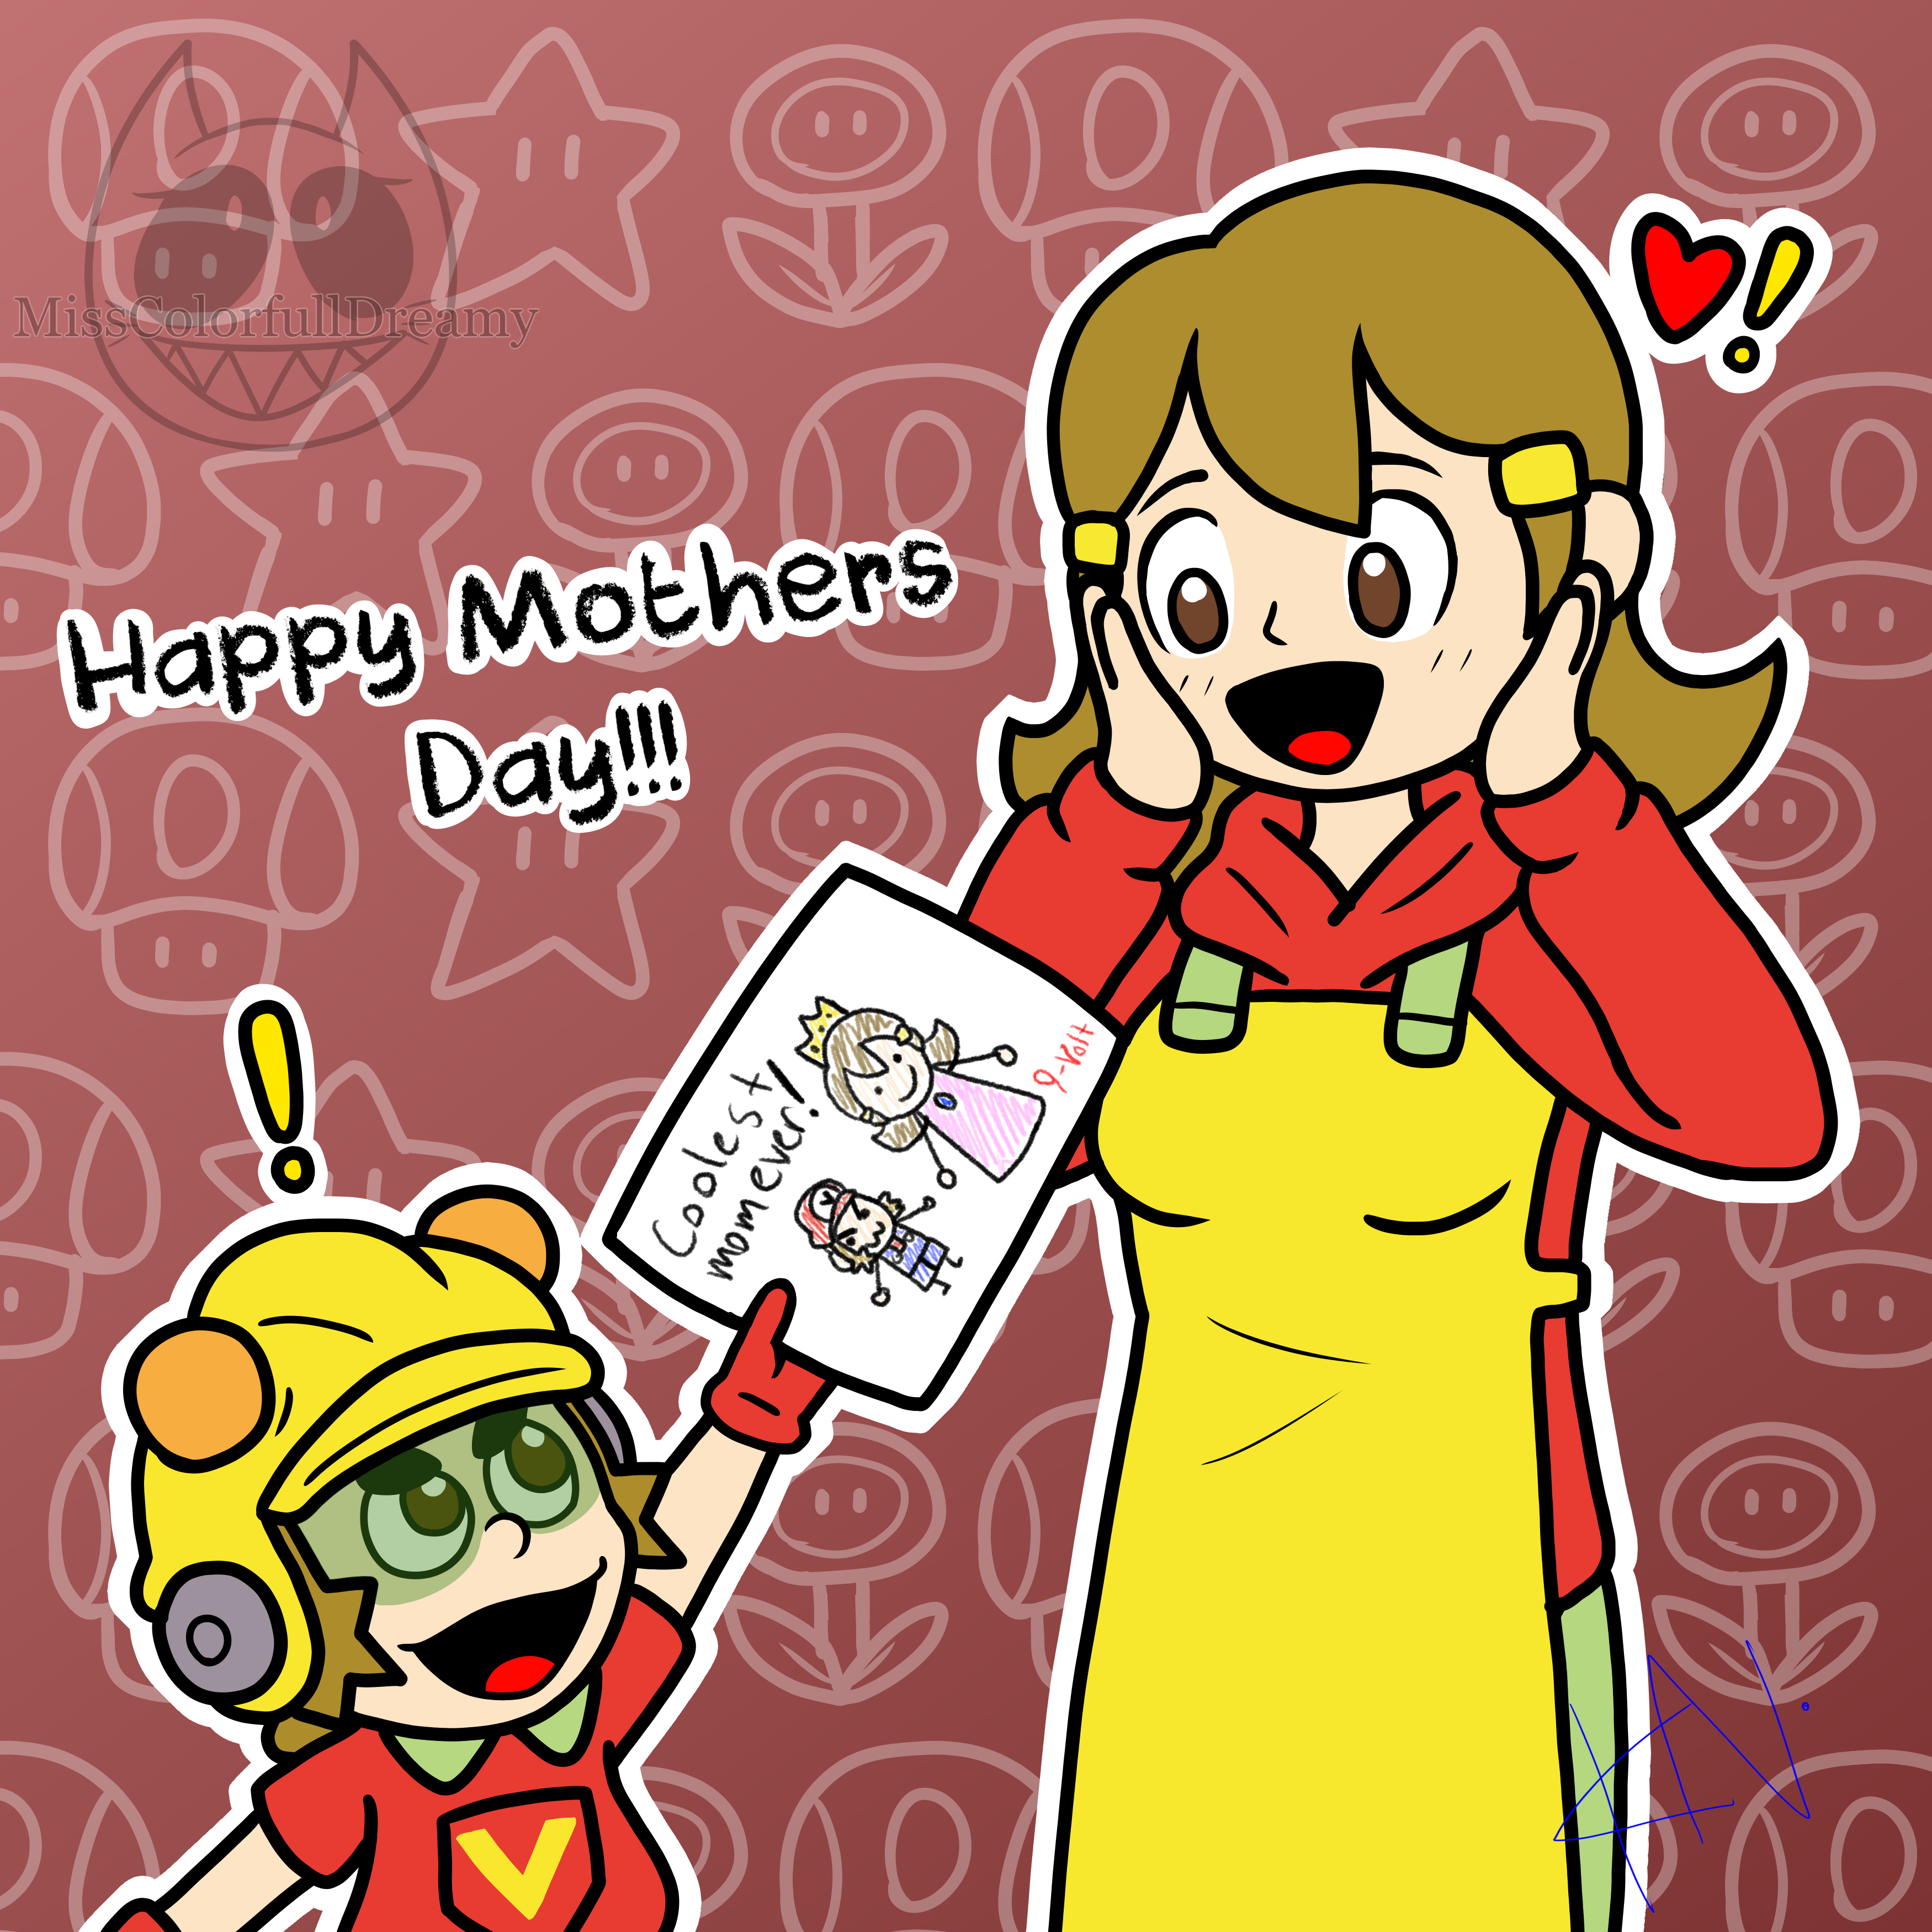 Happy mothers day.png